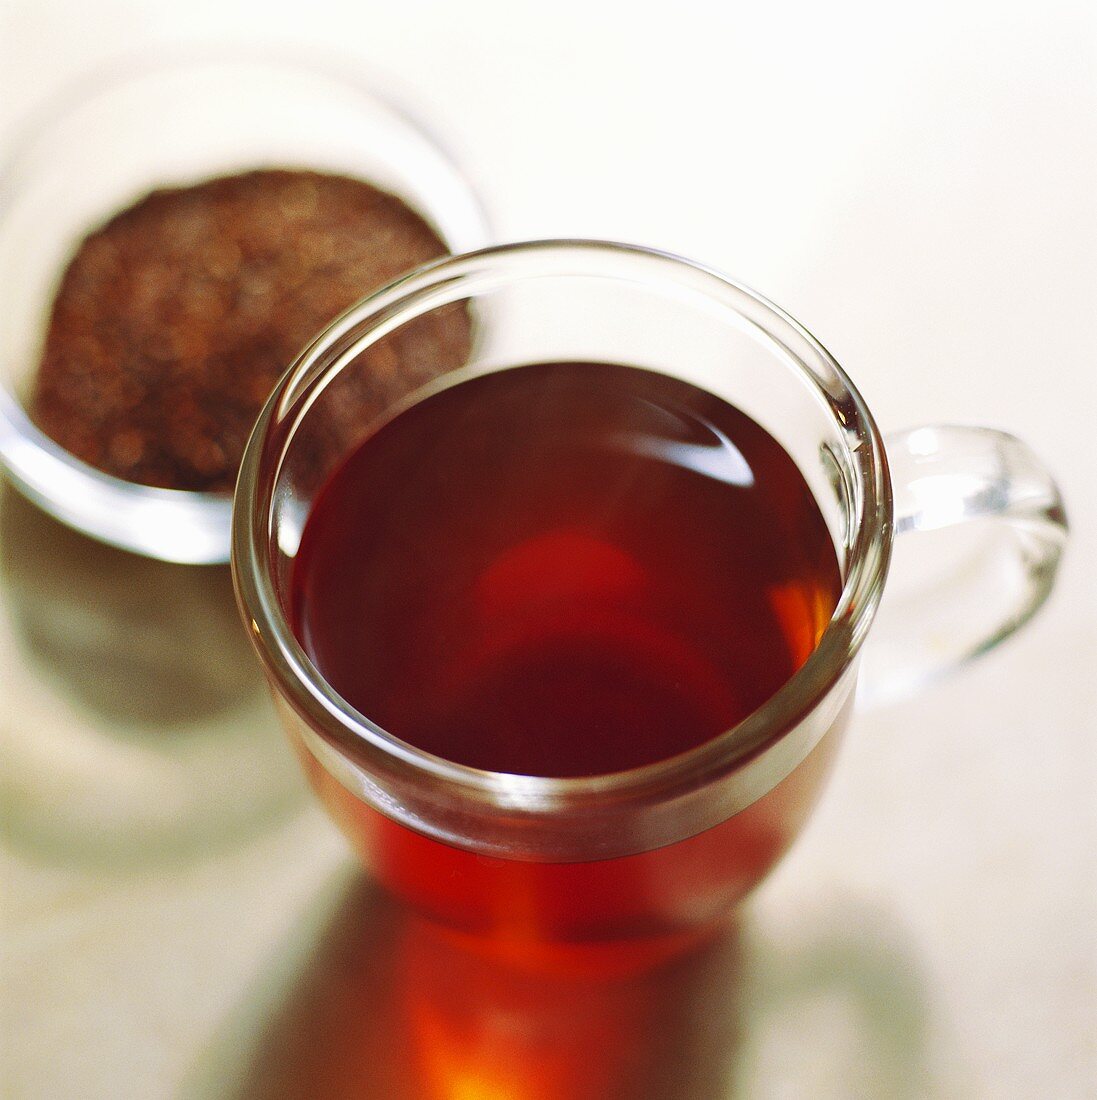 Rooibos tea in glass and unused in bowl